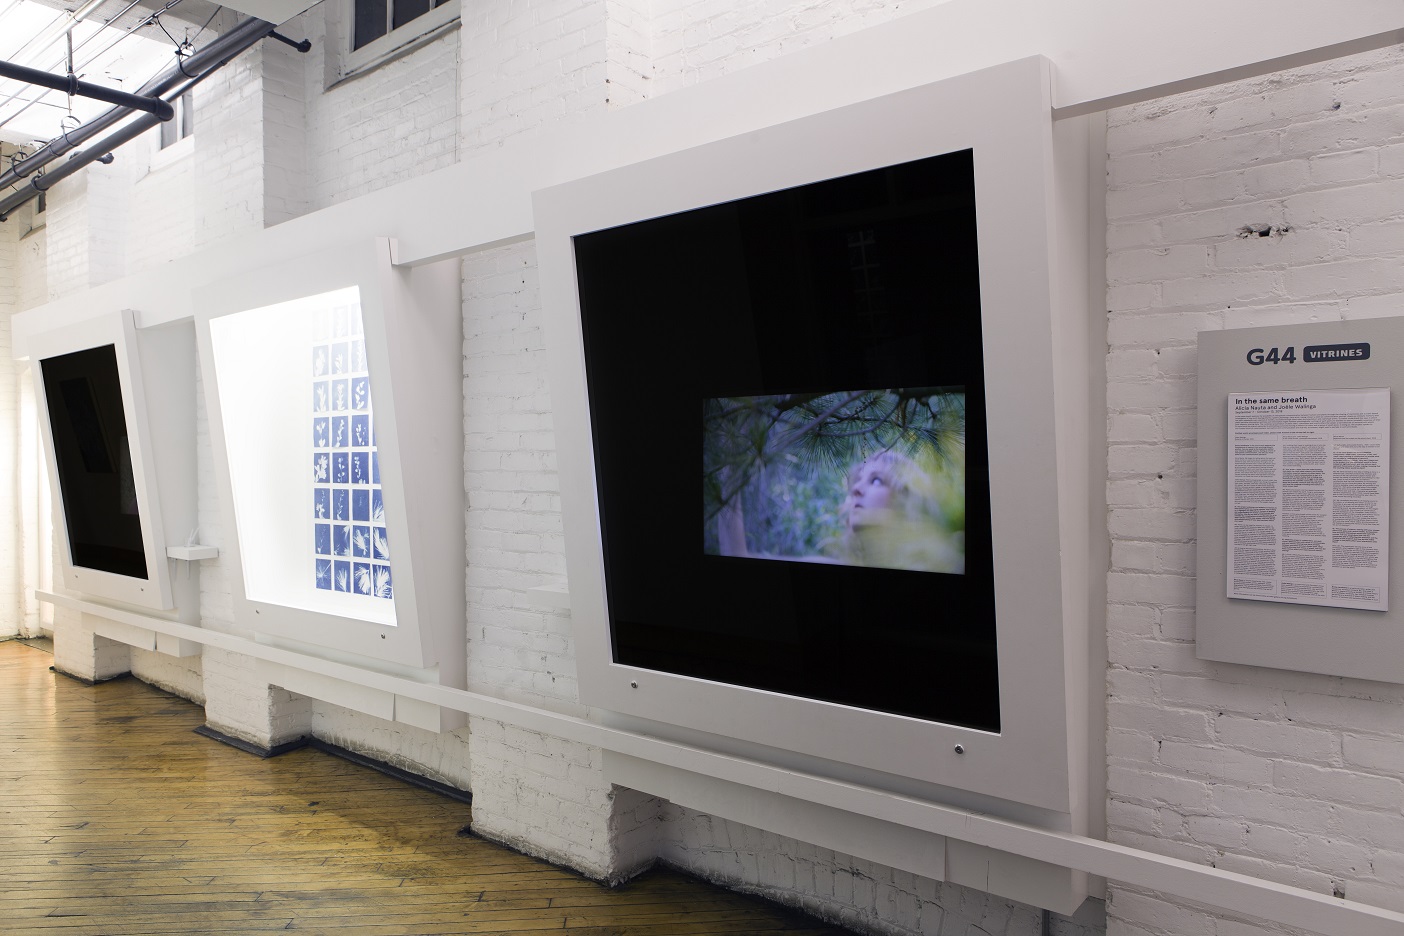  In the same breath, installation shot  Collaboration with Joële Walinga September 7 - October 13, 2018 Gallery 44, Toronto  This exhibition investigates the transference of memory from one living thing to another. "In the same breath" documents Naut